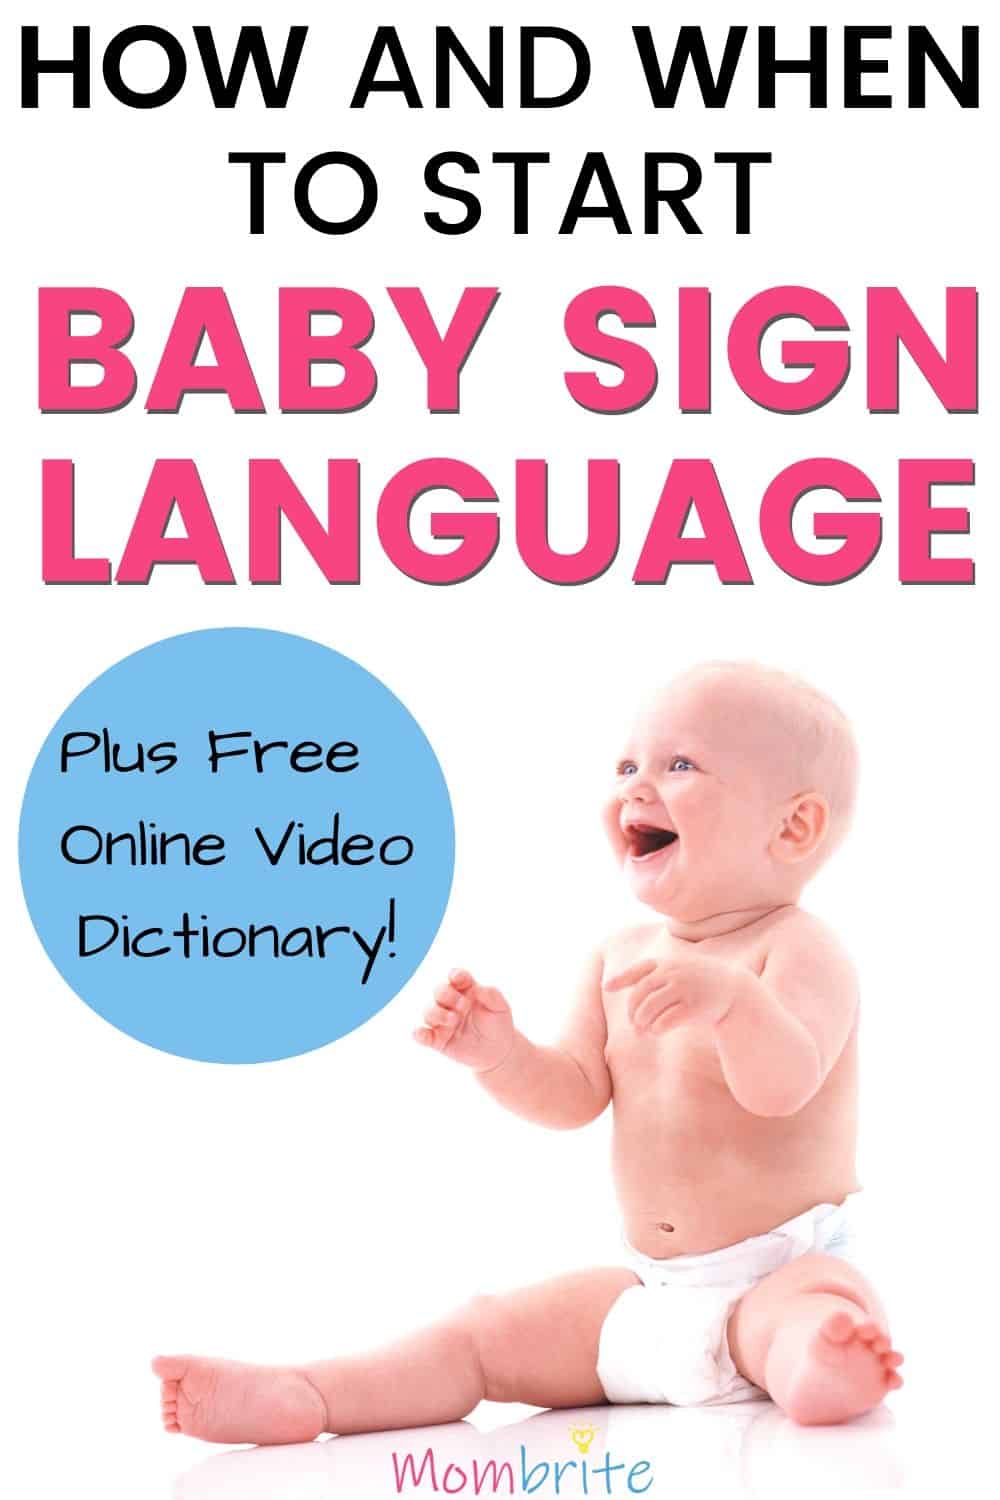 How and When to Start Baby Sign Language